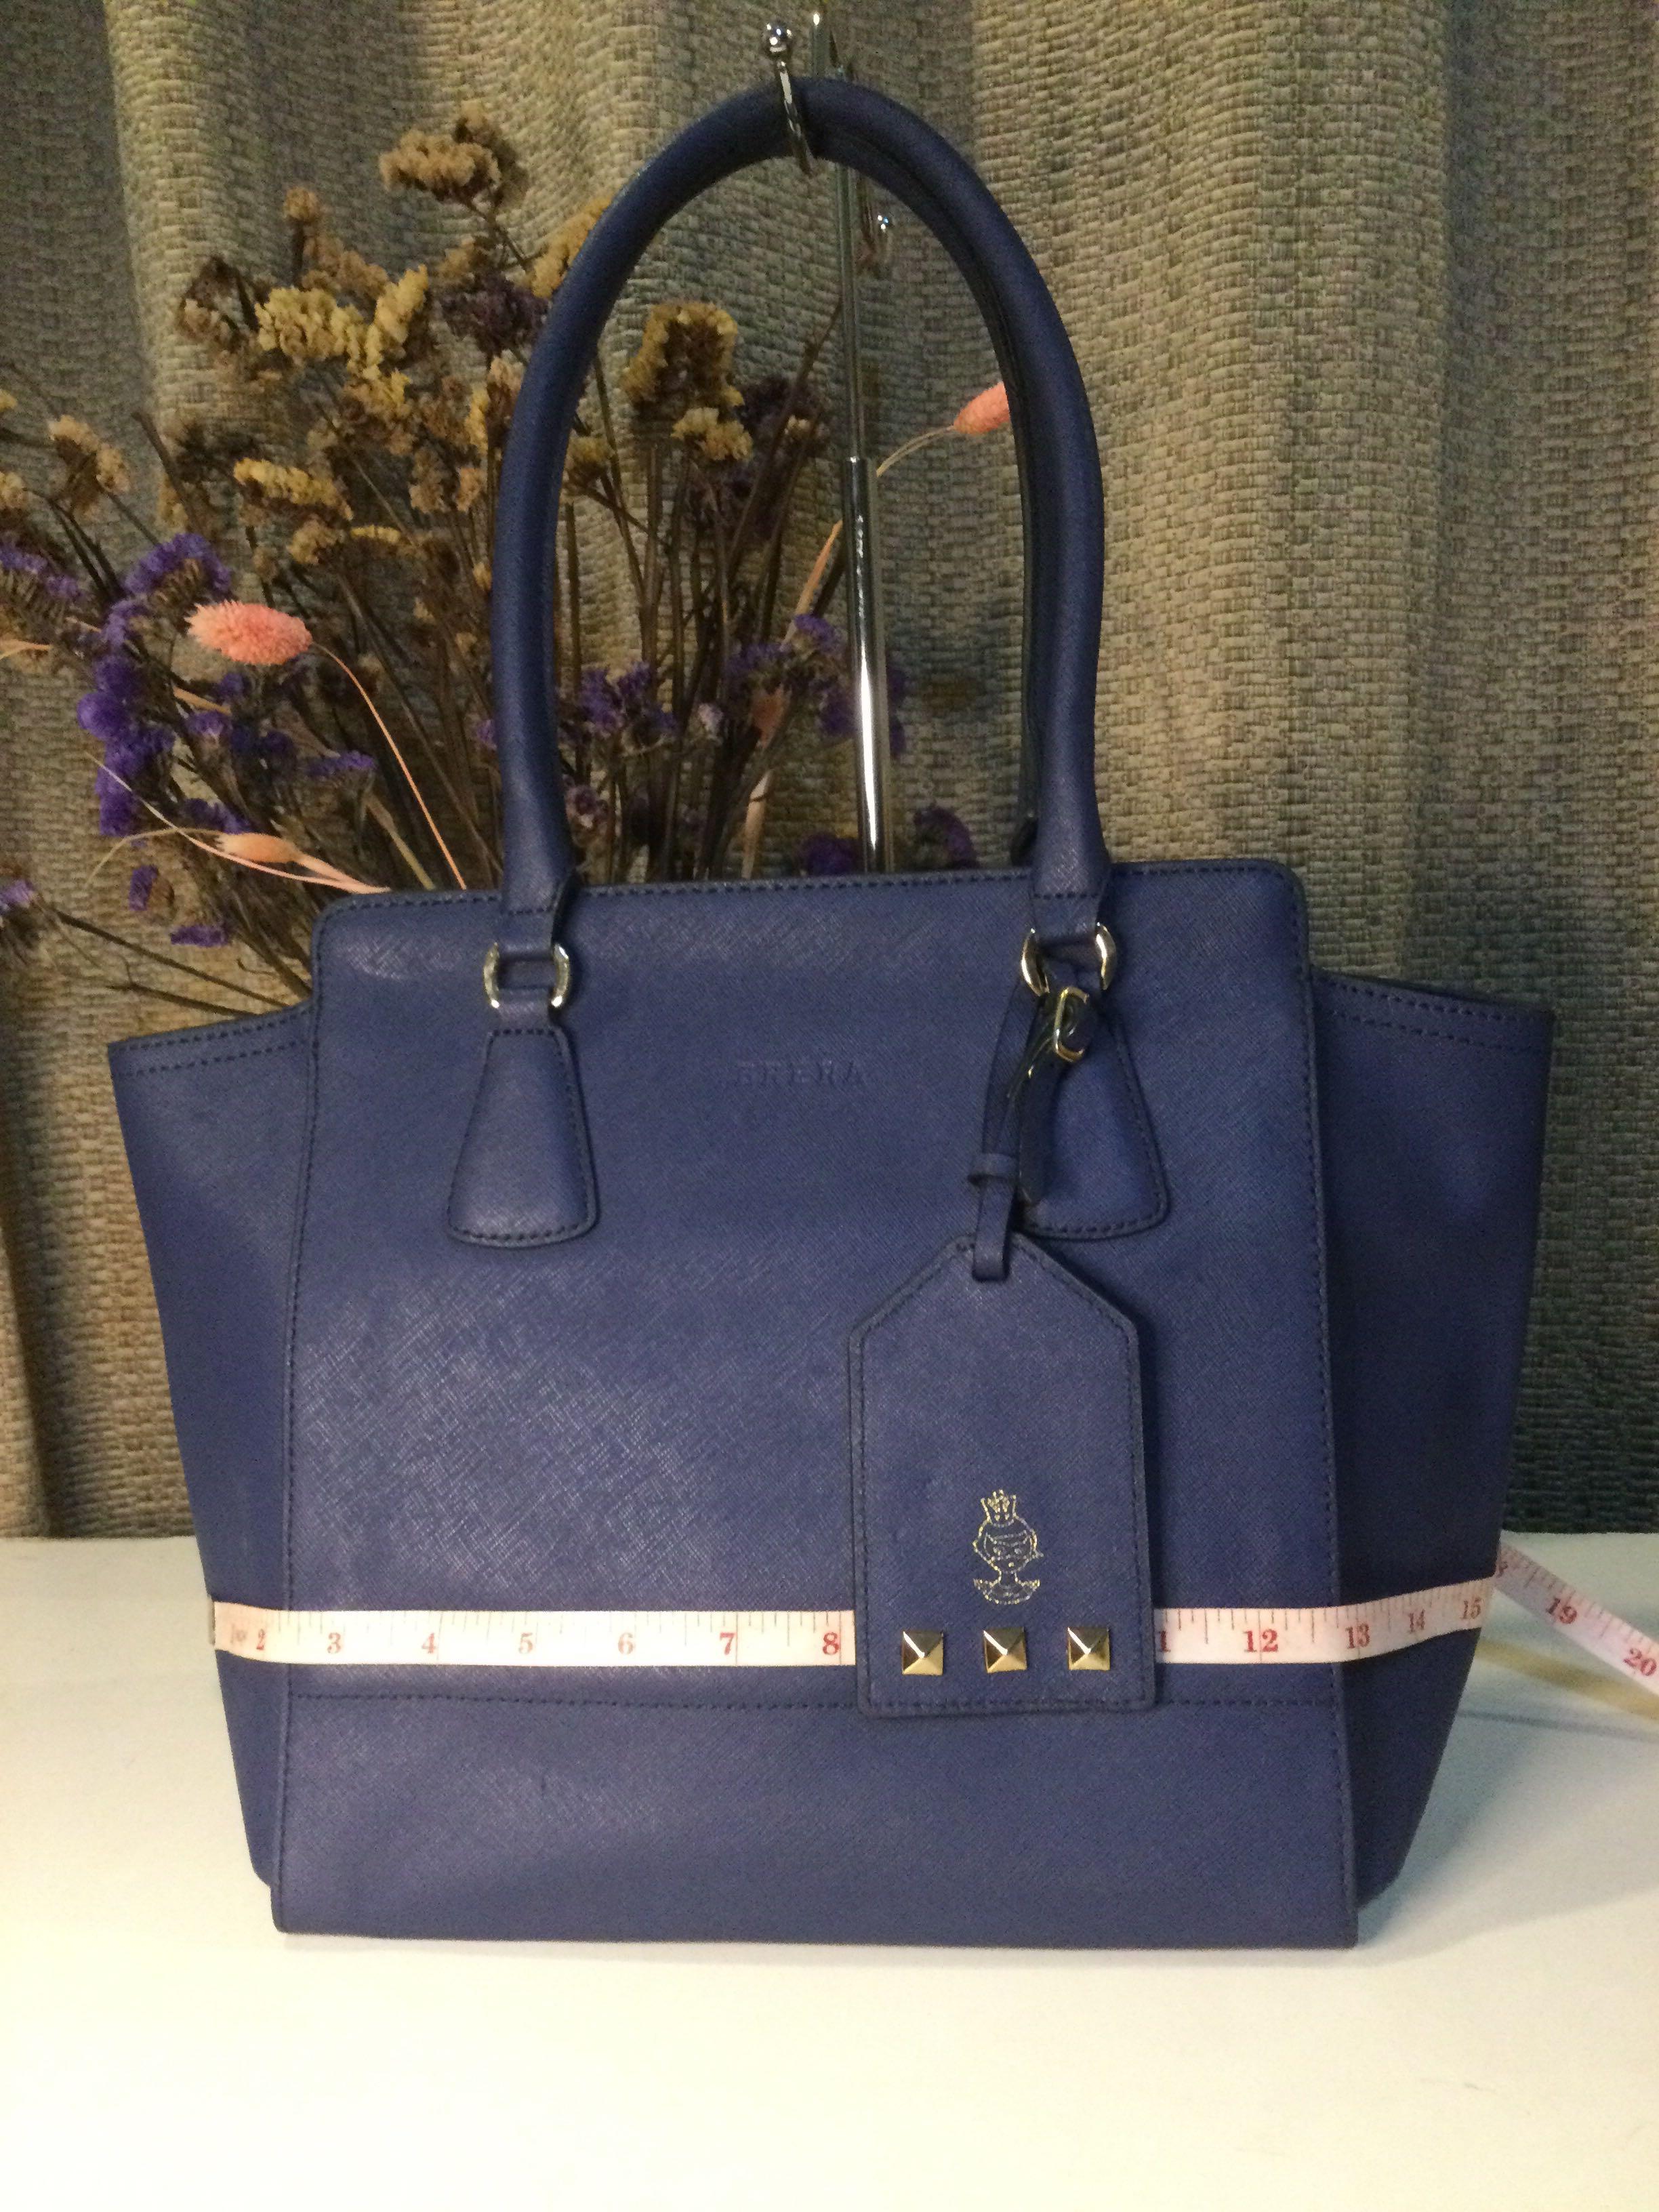 Brera 2-Way Bag with adjustible and removable sling (coded) Price: 1,200  Rank SA Color: midnight blue Material: saffiano leather (excellent  condition), By Bohol Bag Fixation